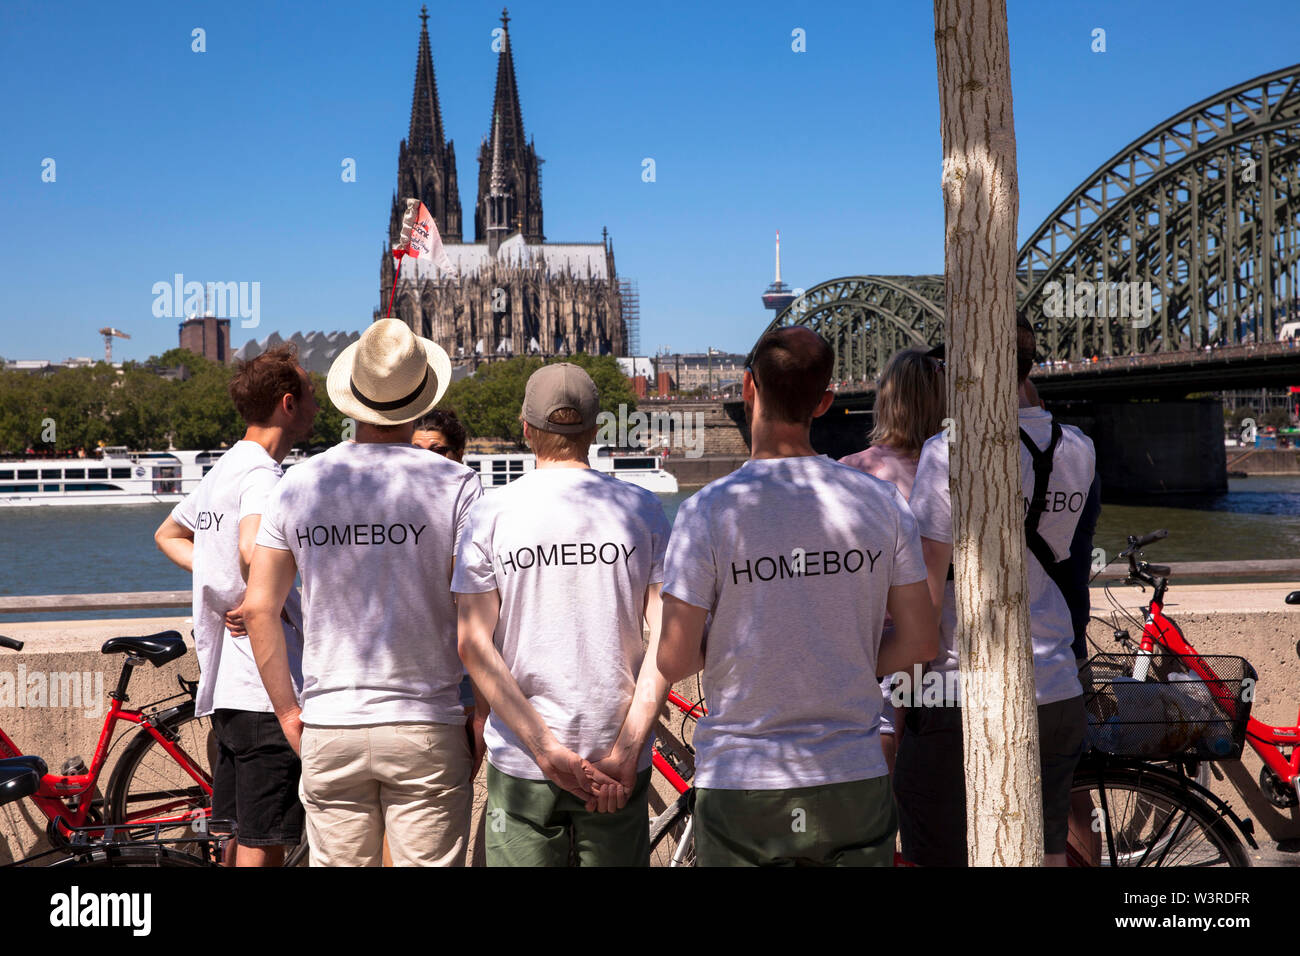 men in Homeboy t-shirts looking towards the cathedral and the Hohenzollern bridge, Cologne, Germany.  Maenner mit Homeboy T-Shirts schauen zum Dom und Stock Photo